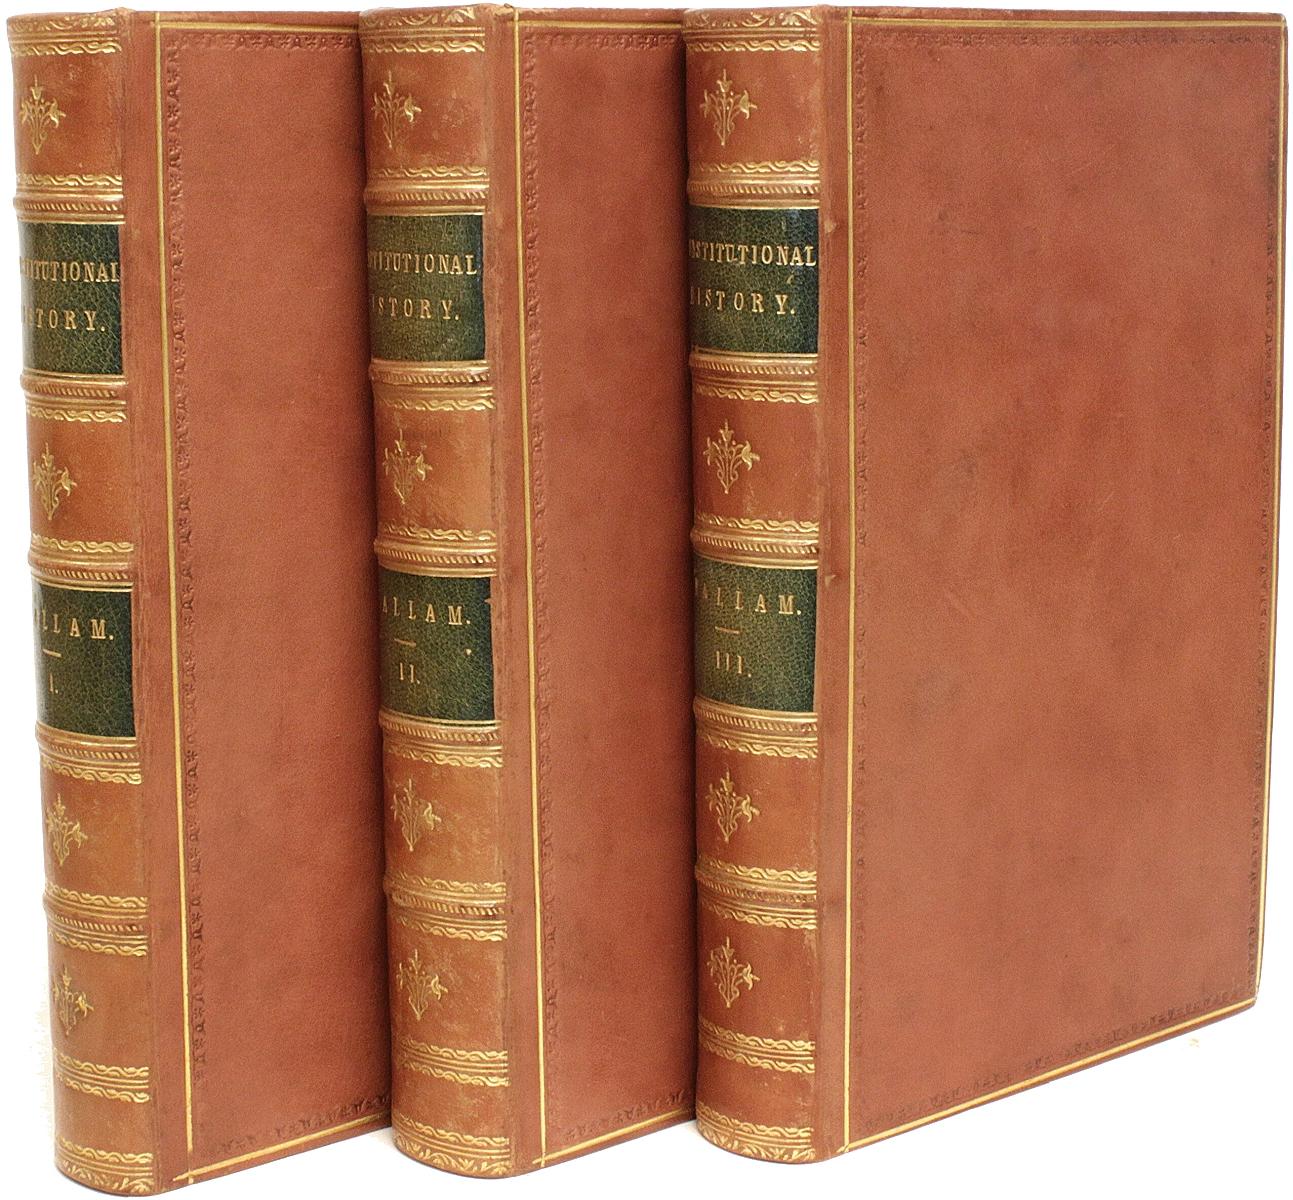 Author: Hallam, Henry. 

Title: The Constitutional History of England From The Accession of Henry VII To The Death of George II.

Publisher: London: John Murray, 1867.

Description: Eighth Edition. 3 vols., 8-9/16